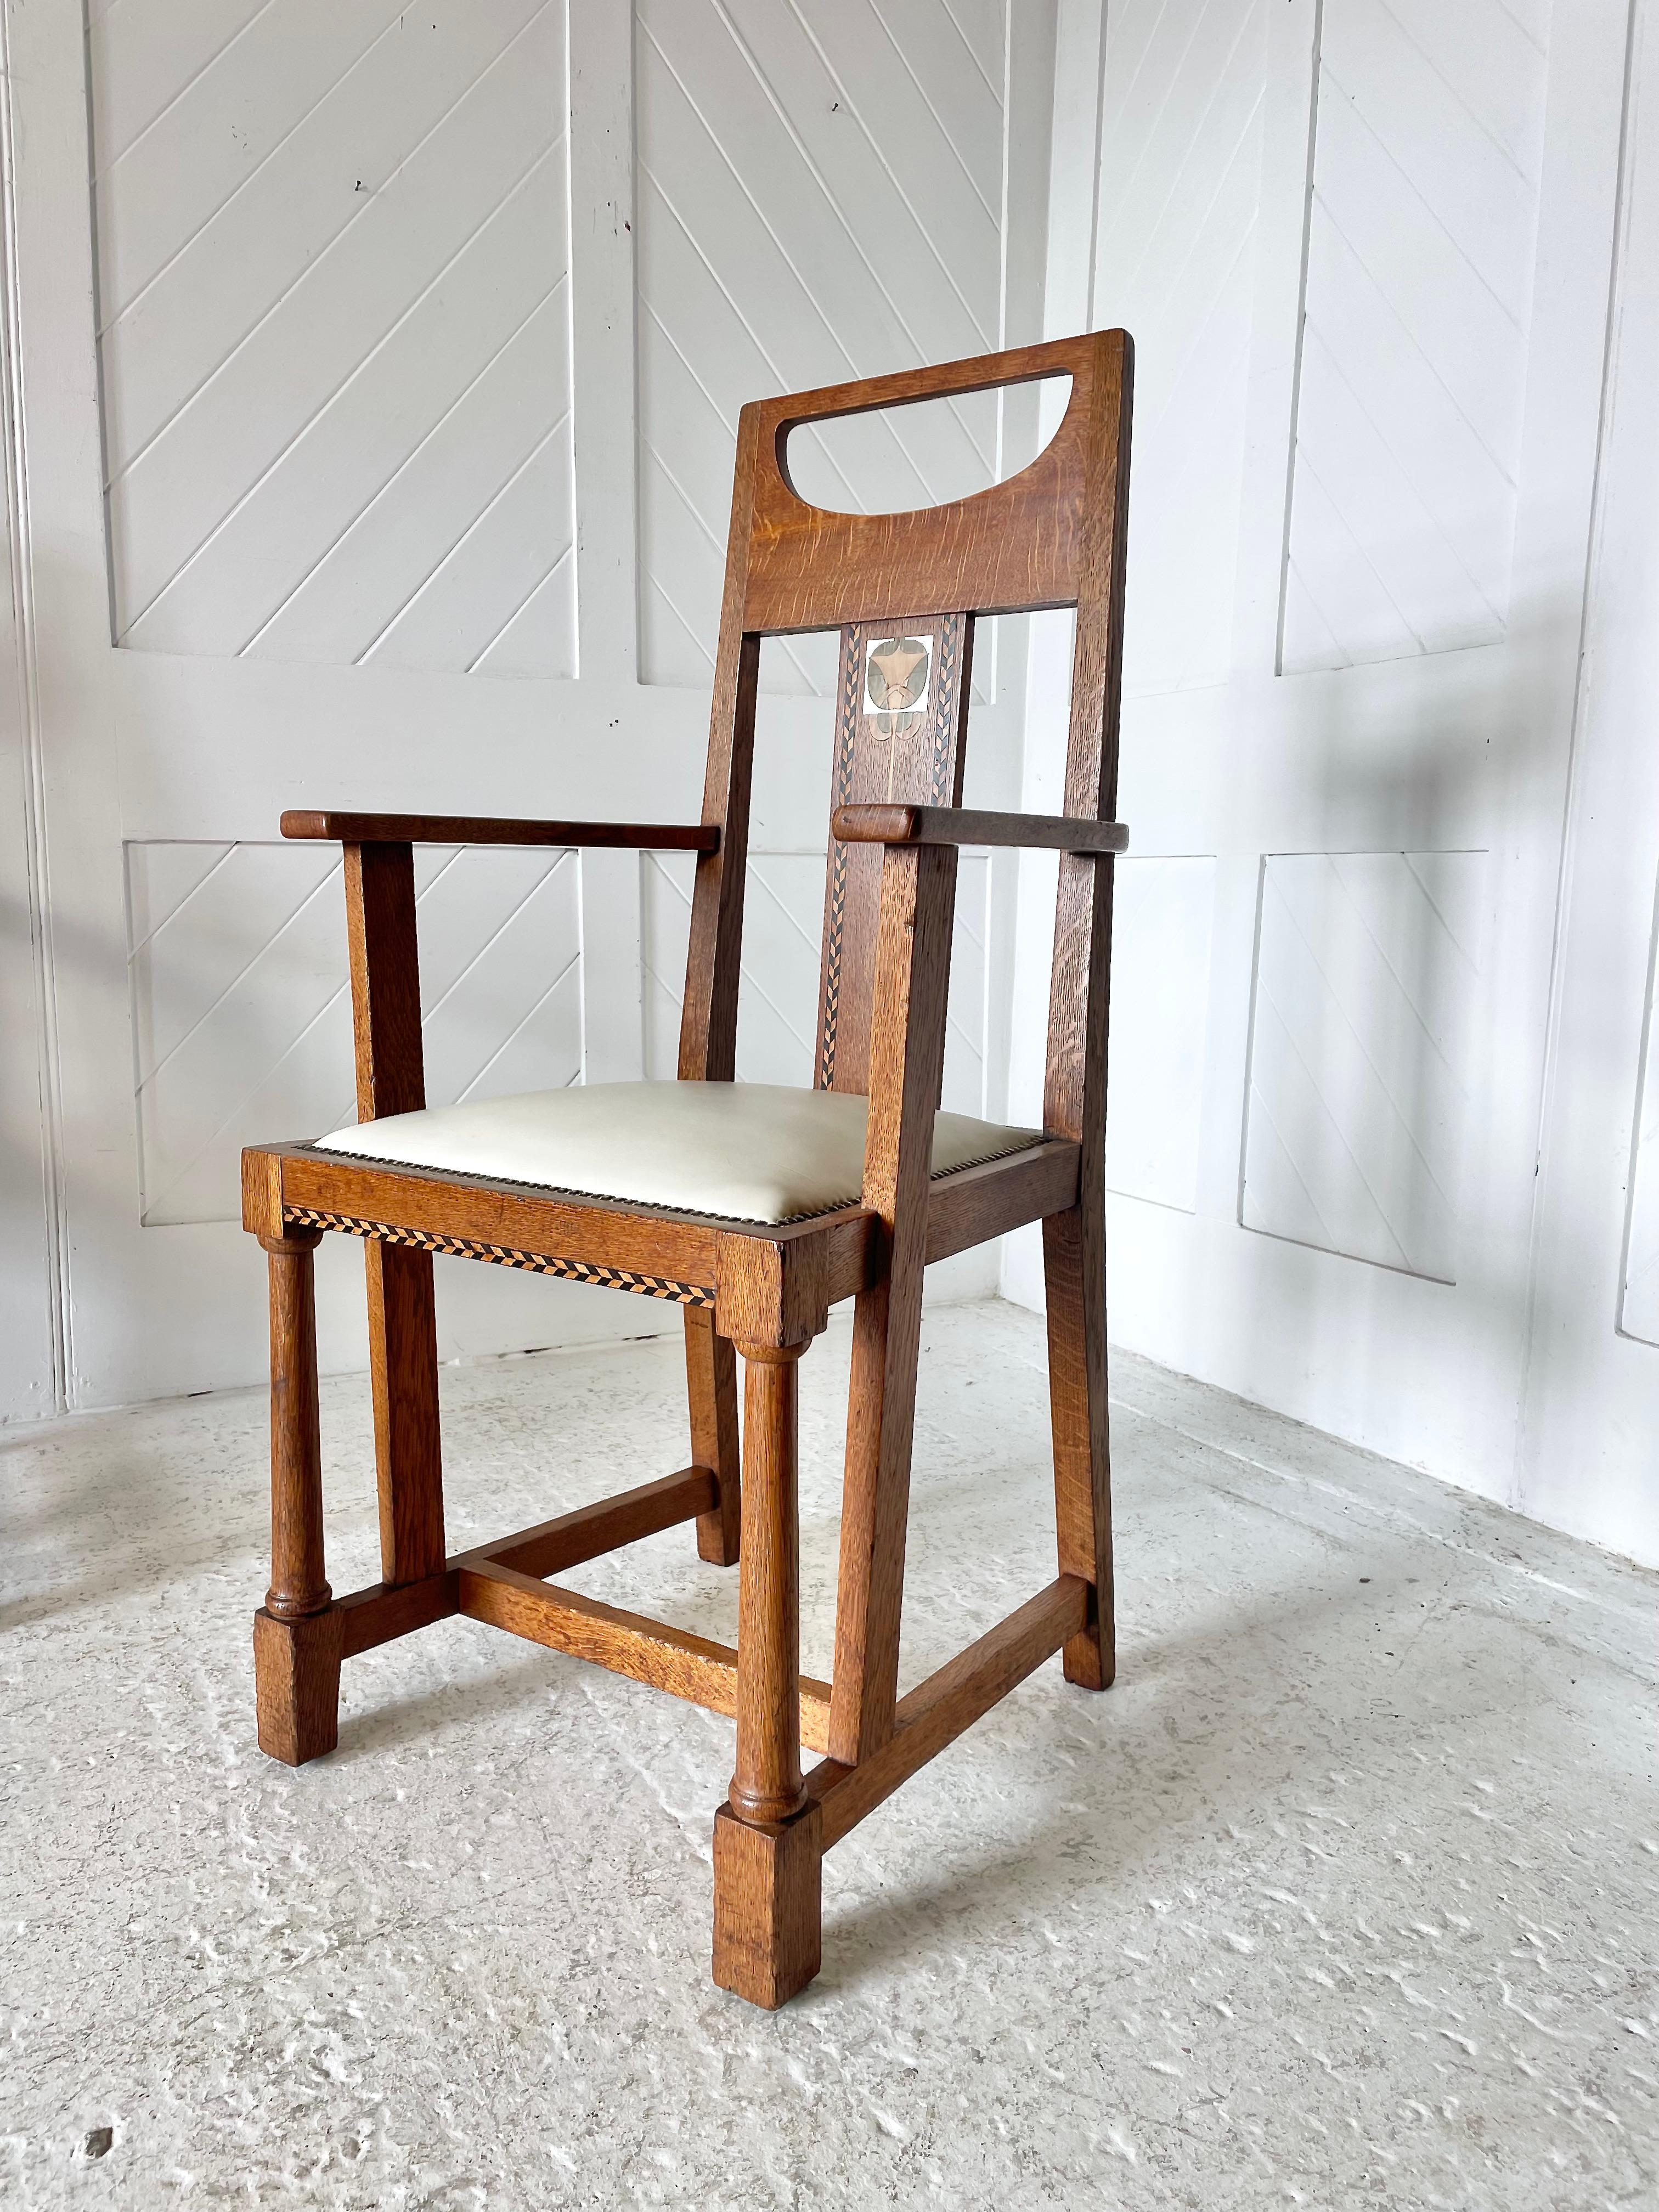 Early 20th Century Pair of Arts and Crafts carver chairs designed by G.M. Ellwood 1905 For Sale